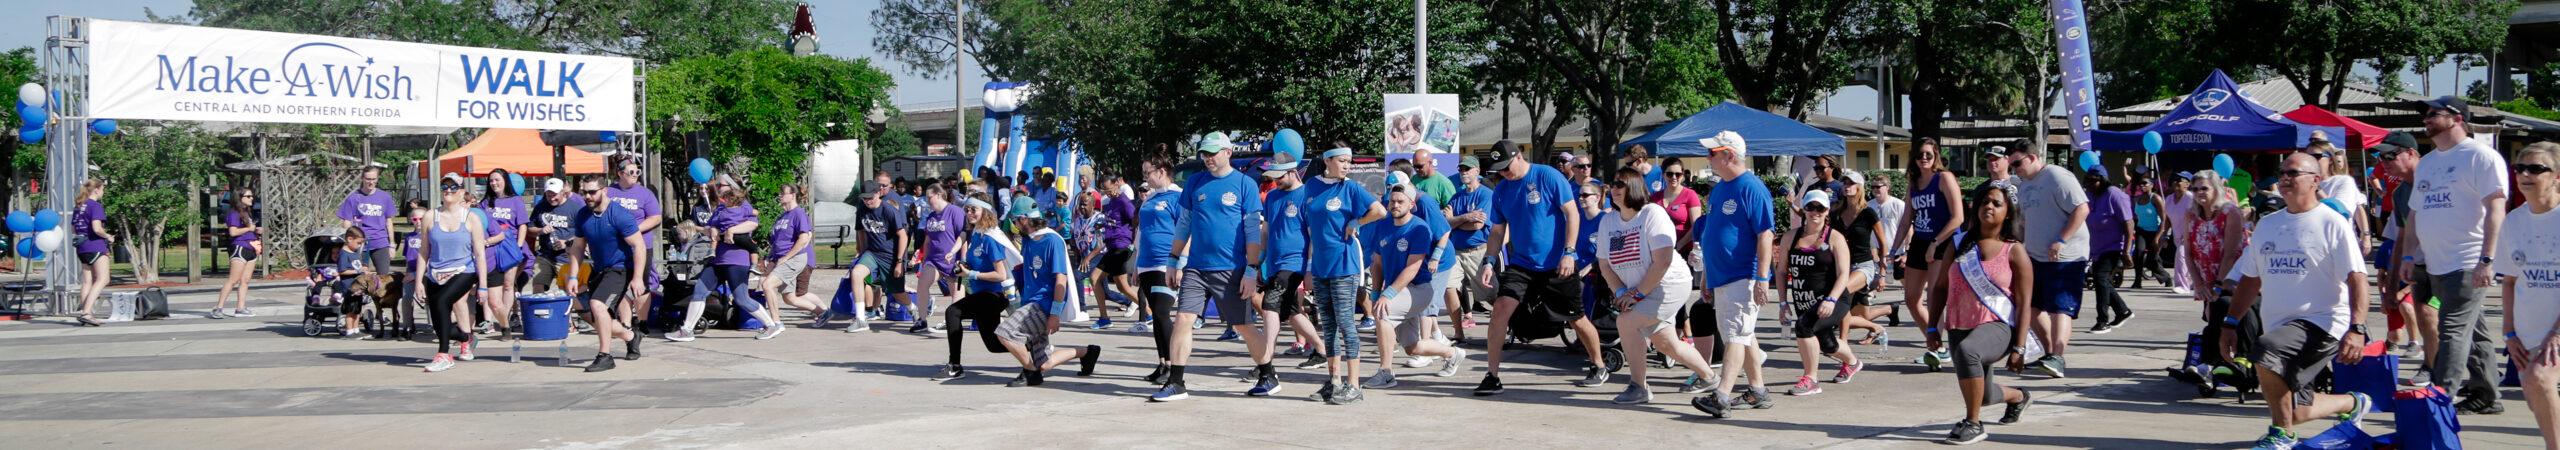 Make a Wish – Walk for Wishes 2018